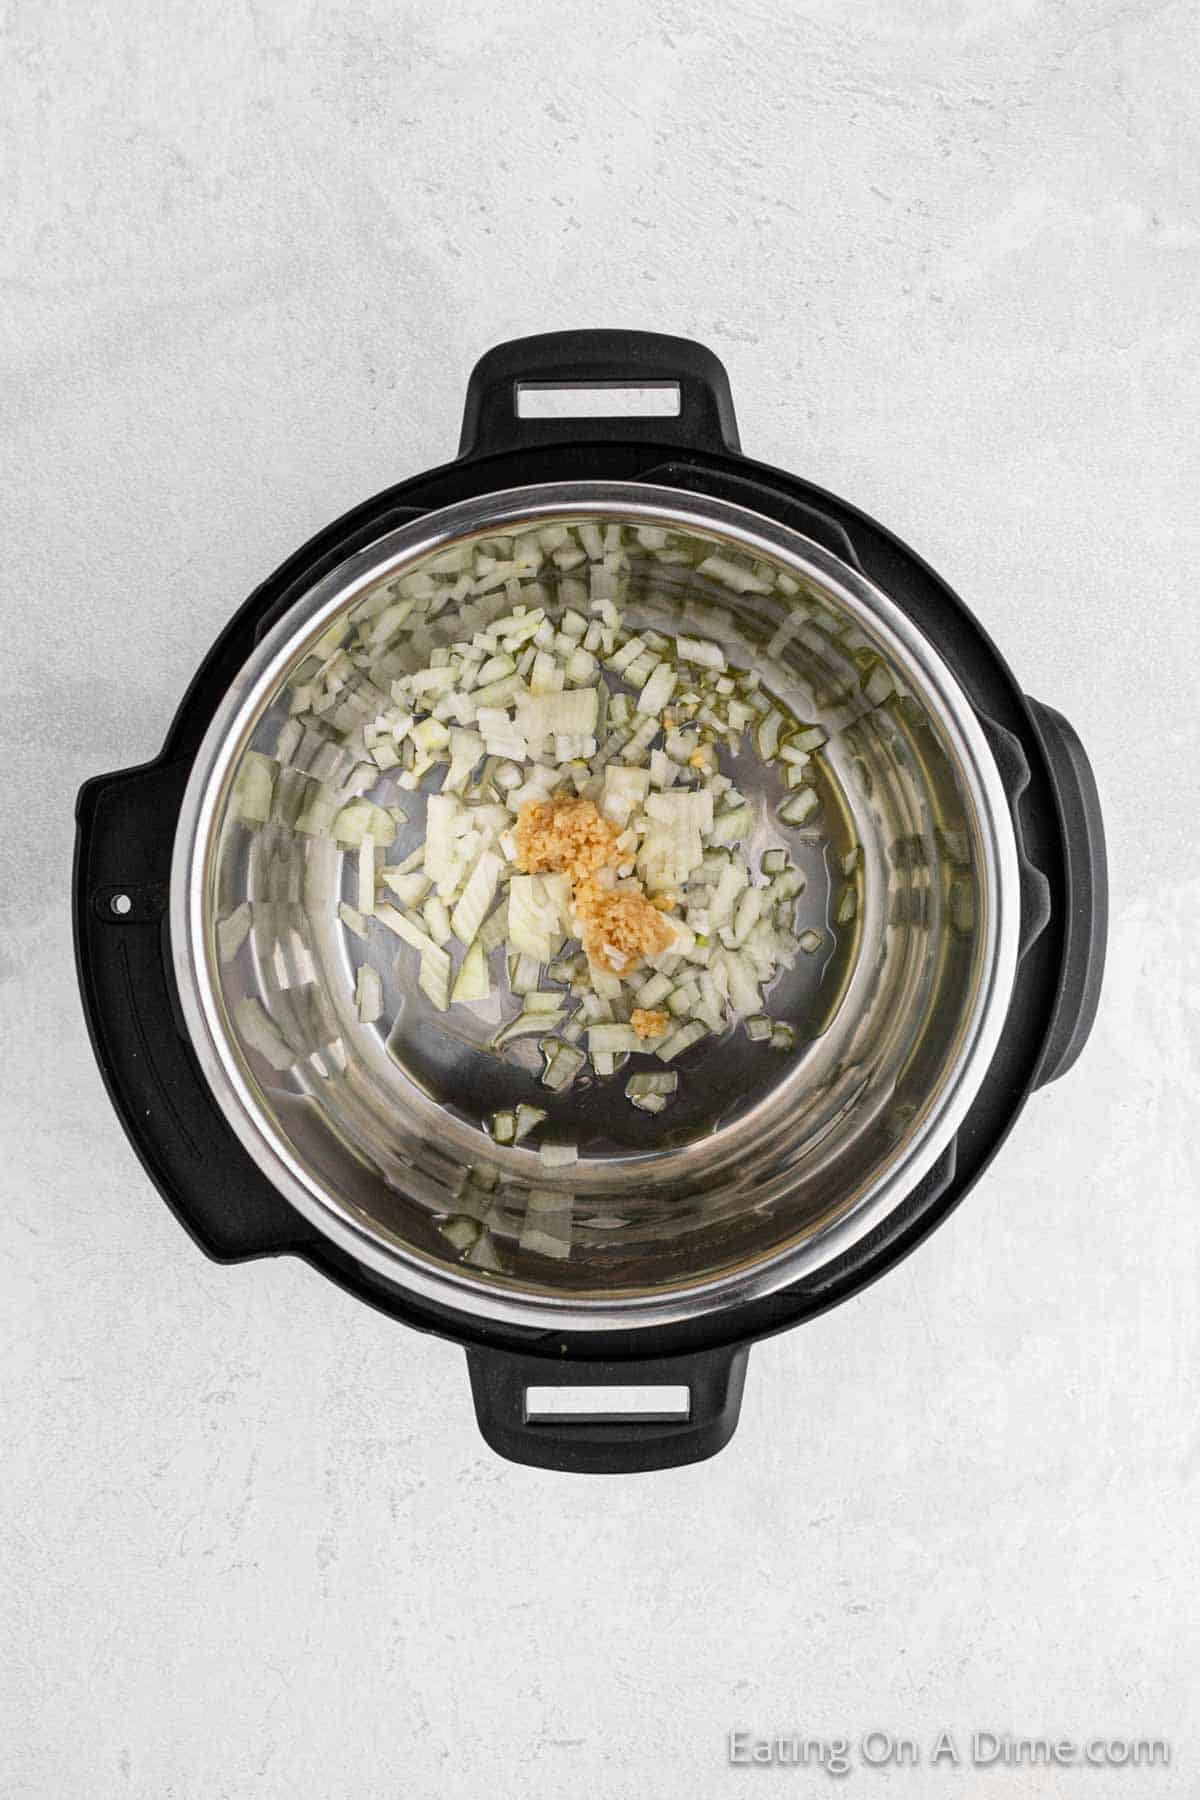 Placing the chopped onions and garlic in the instant pot